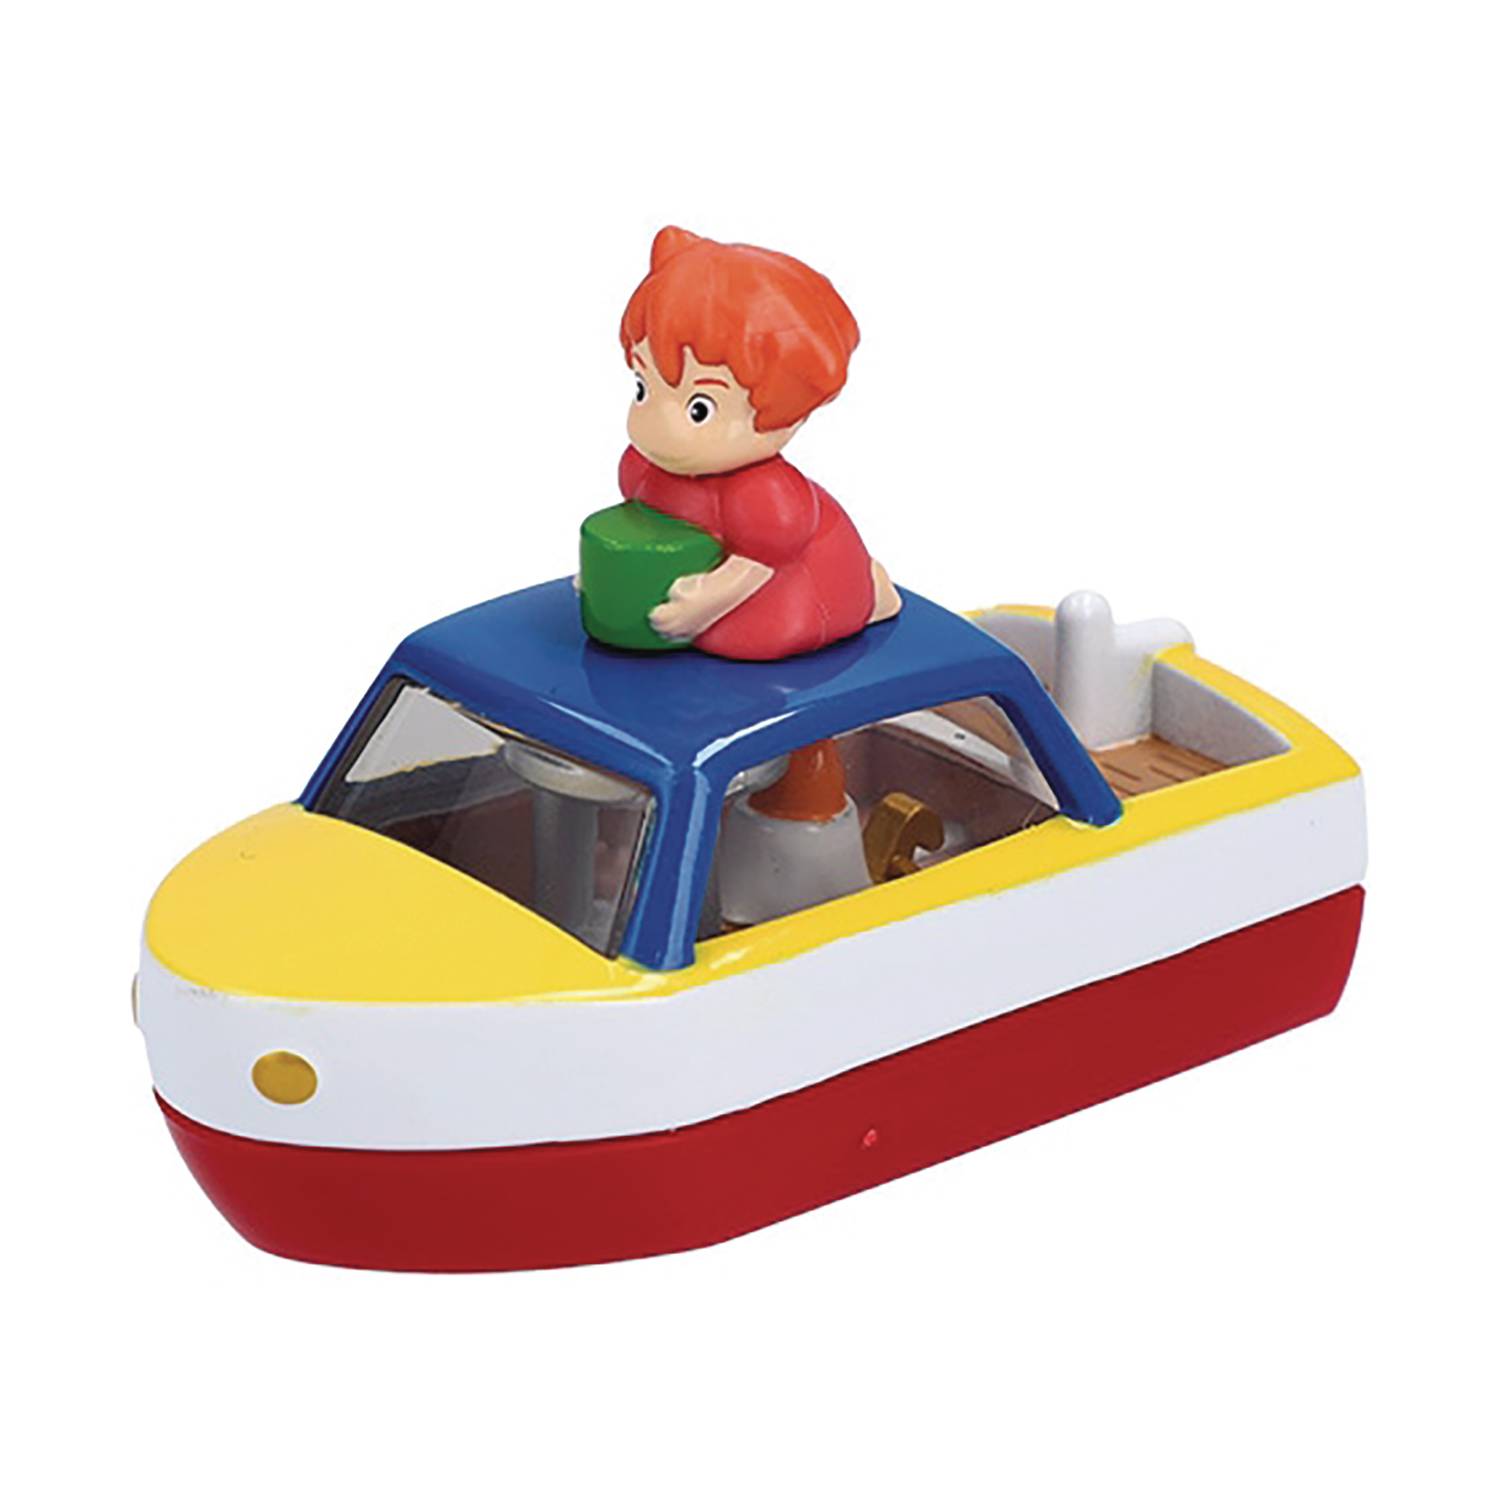 PONYO SOUSUKES TOY BOAT DREAM TOMICA FIG